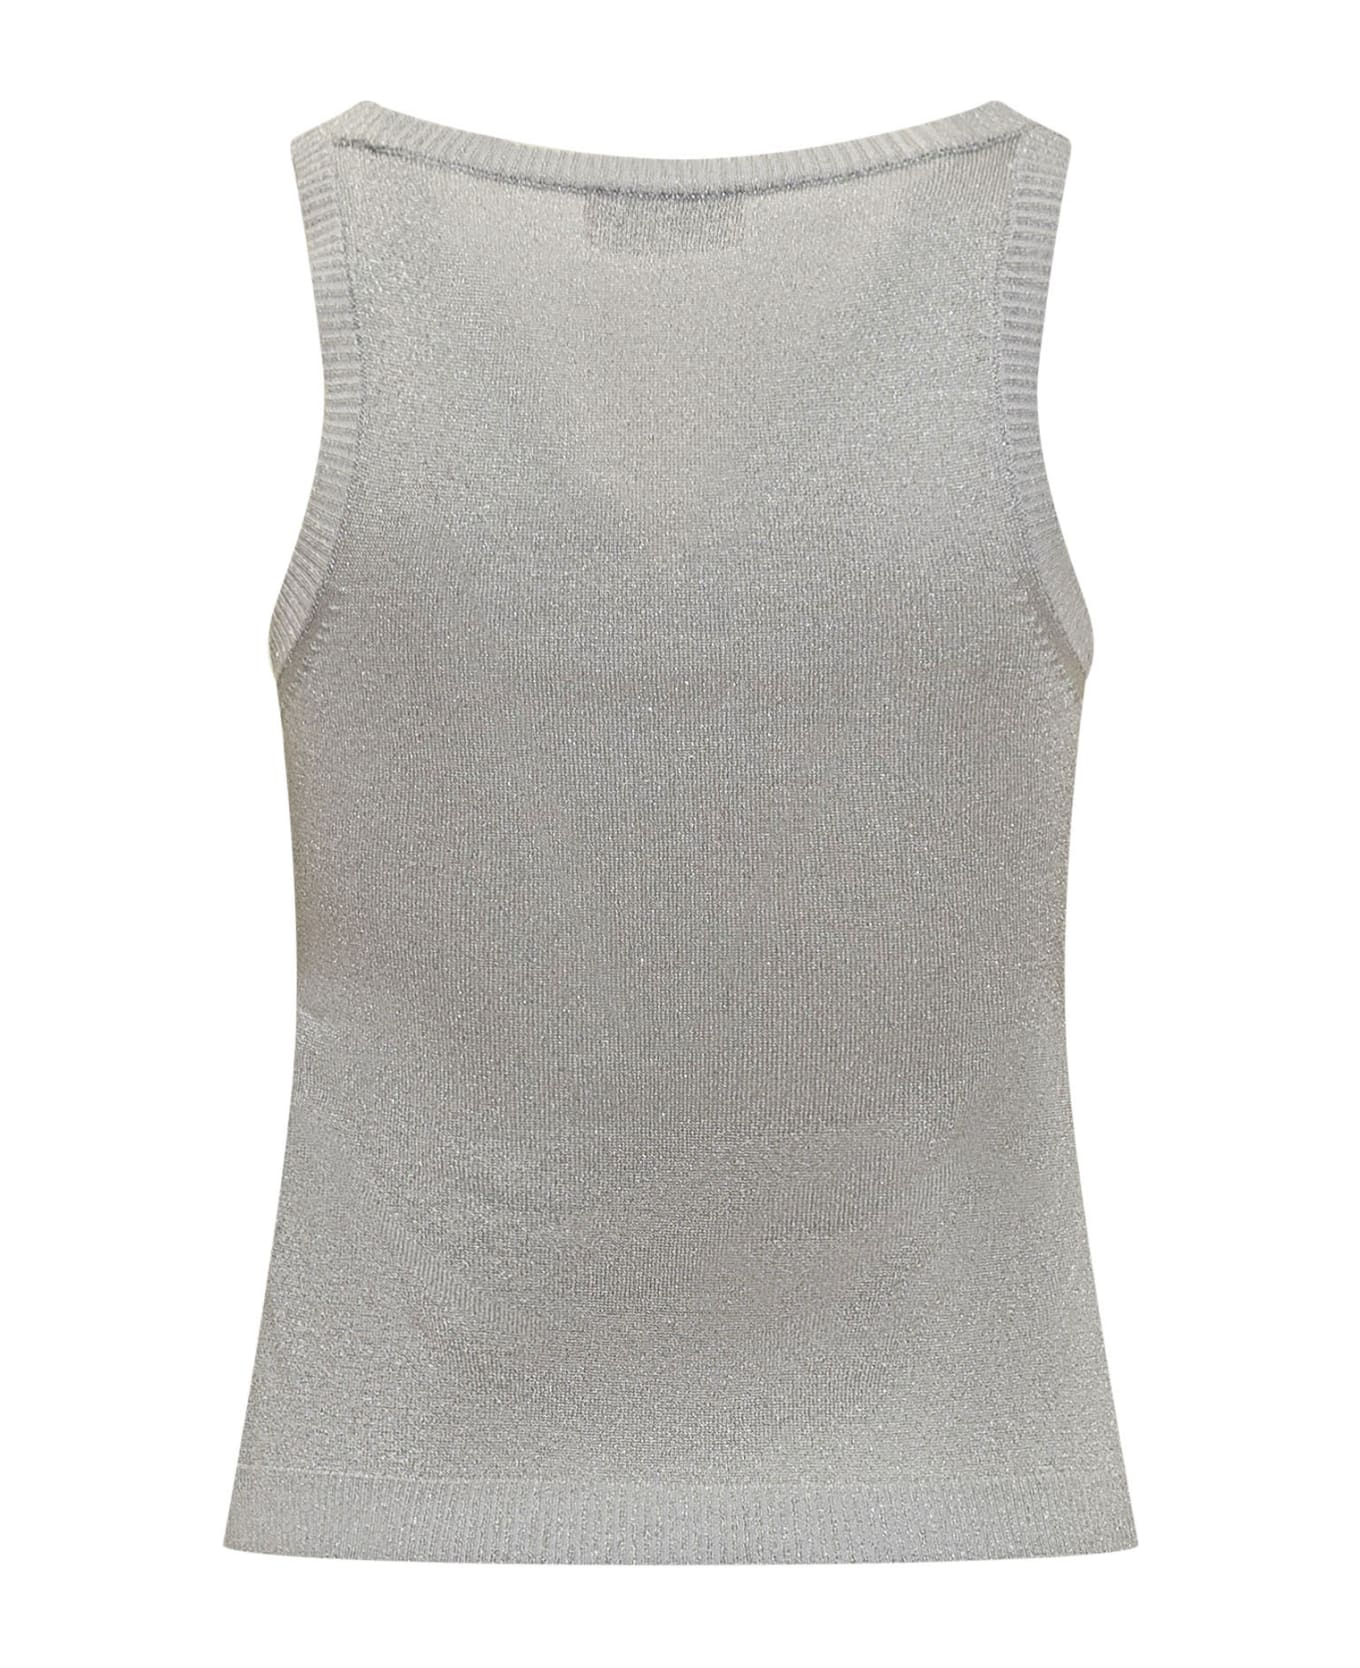 Missoni Viscose Tank Top With Metalized Filaments - SILVER